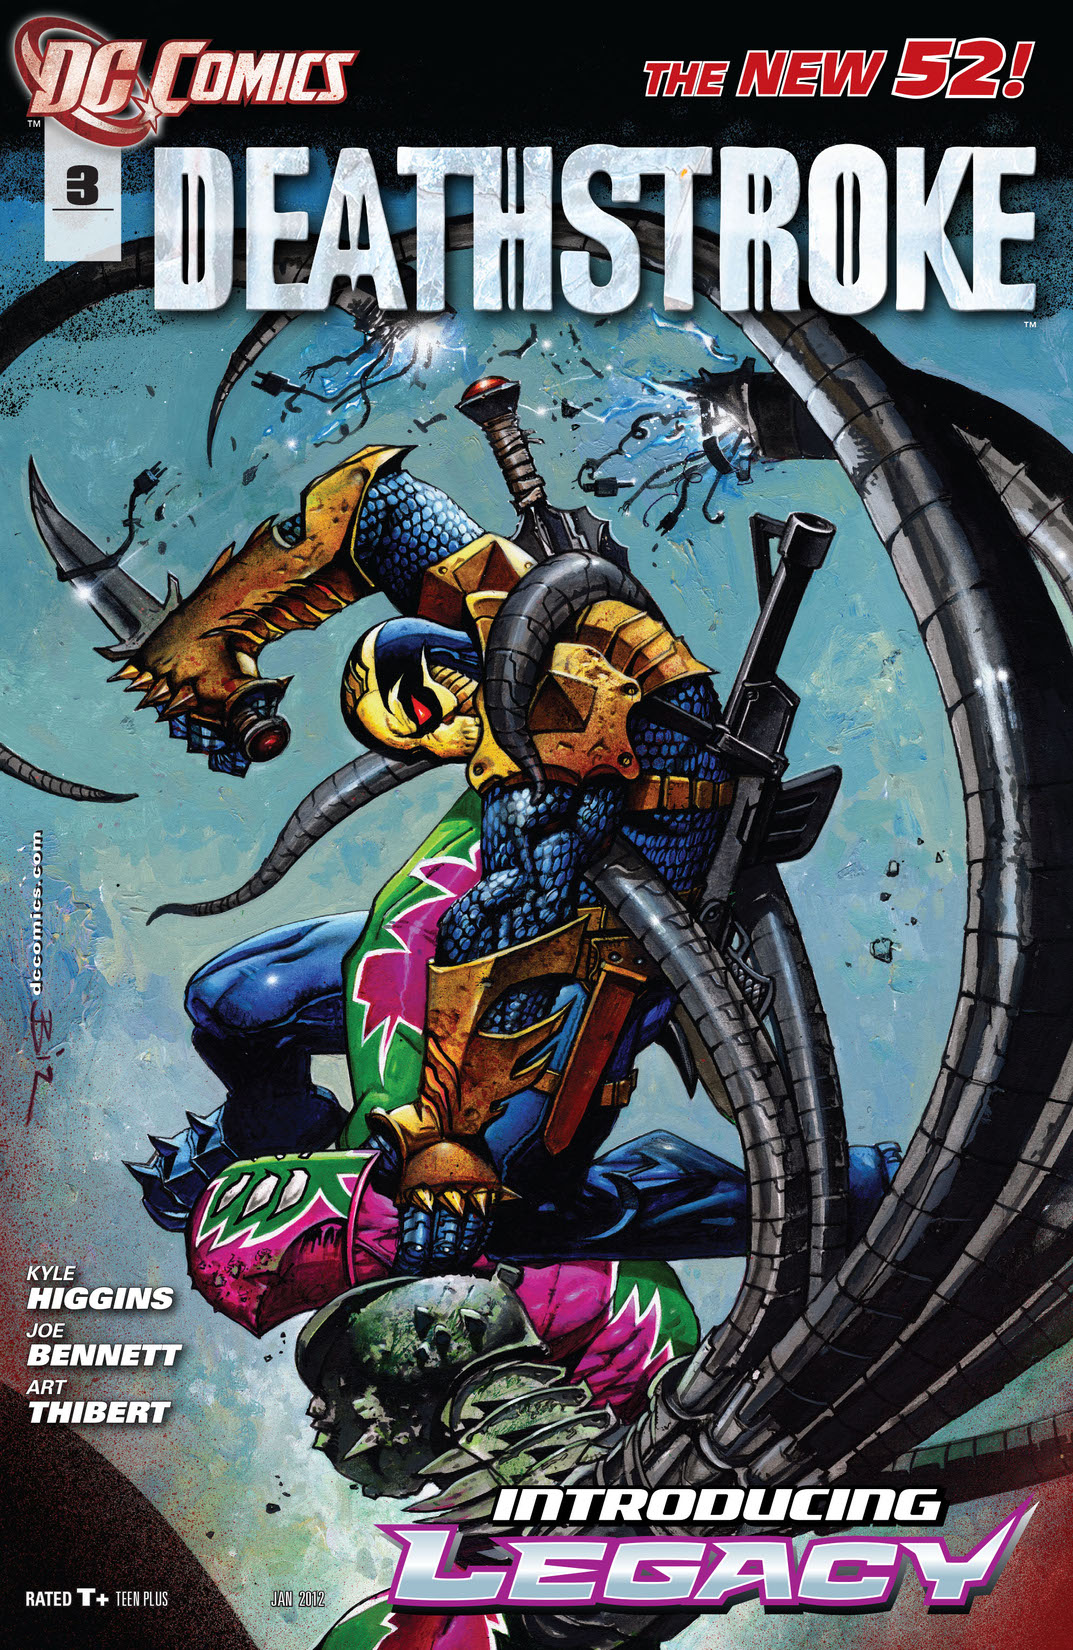 Deathstroke (2011-) #3 preview images